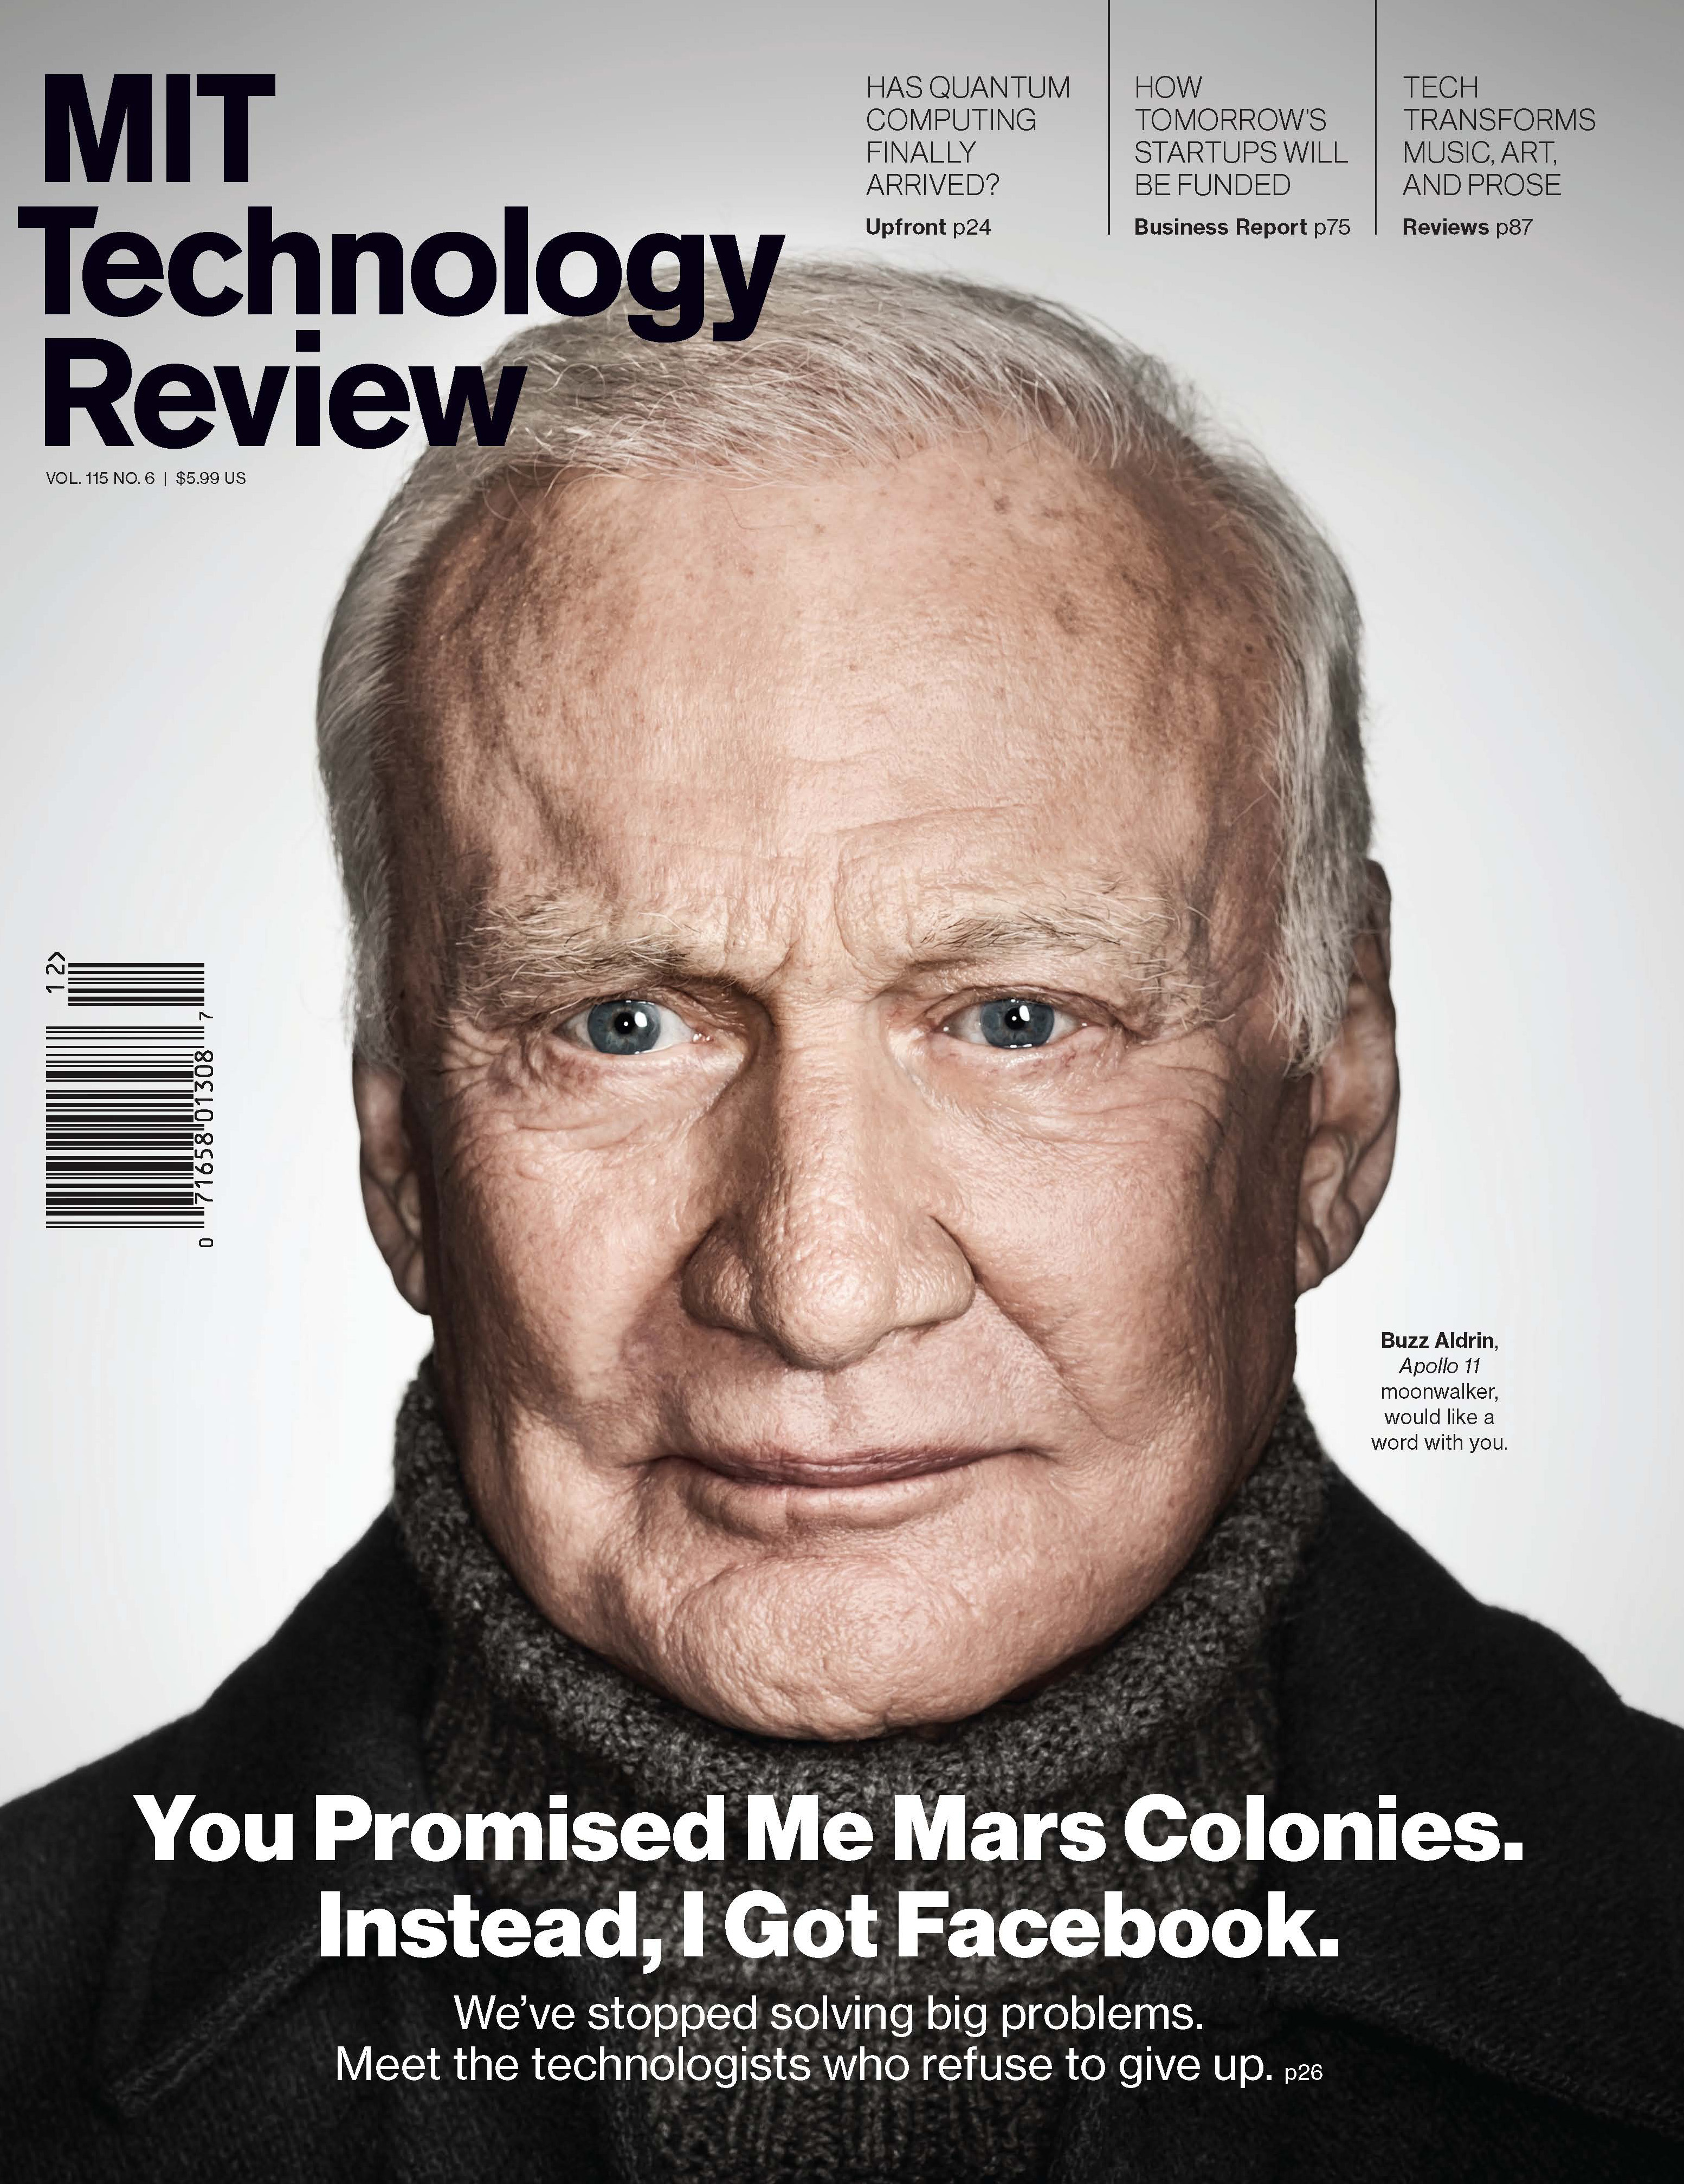 MIT Technology Review-November/December 2012: "You Promised Me Mars Colonies. Instead, I Got Facebook."